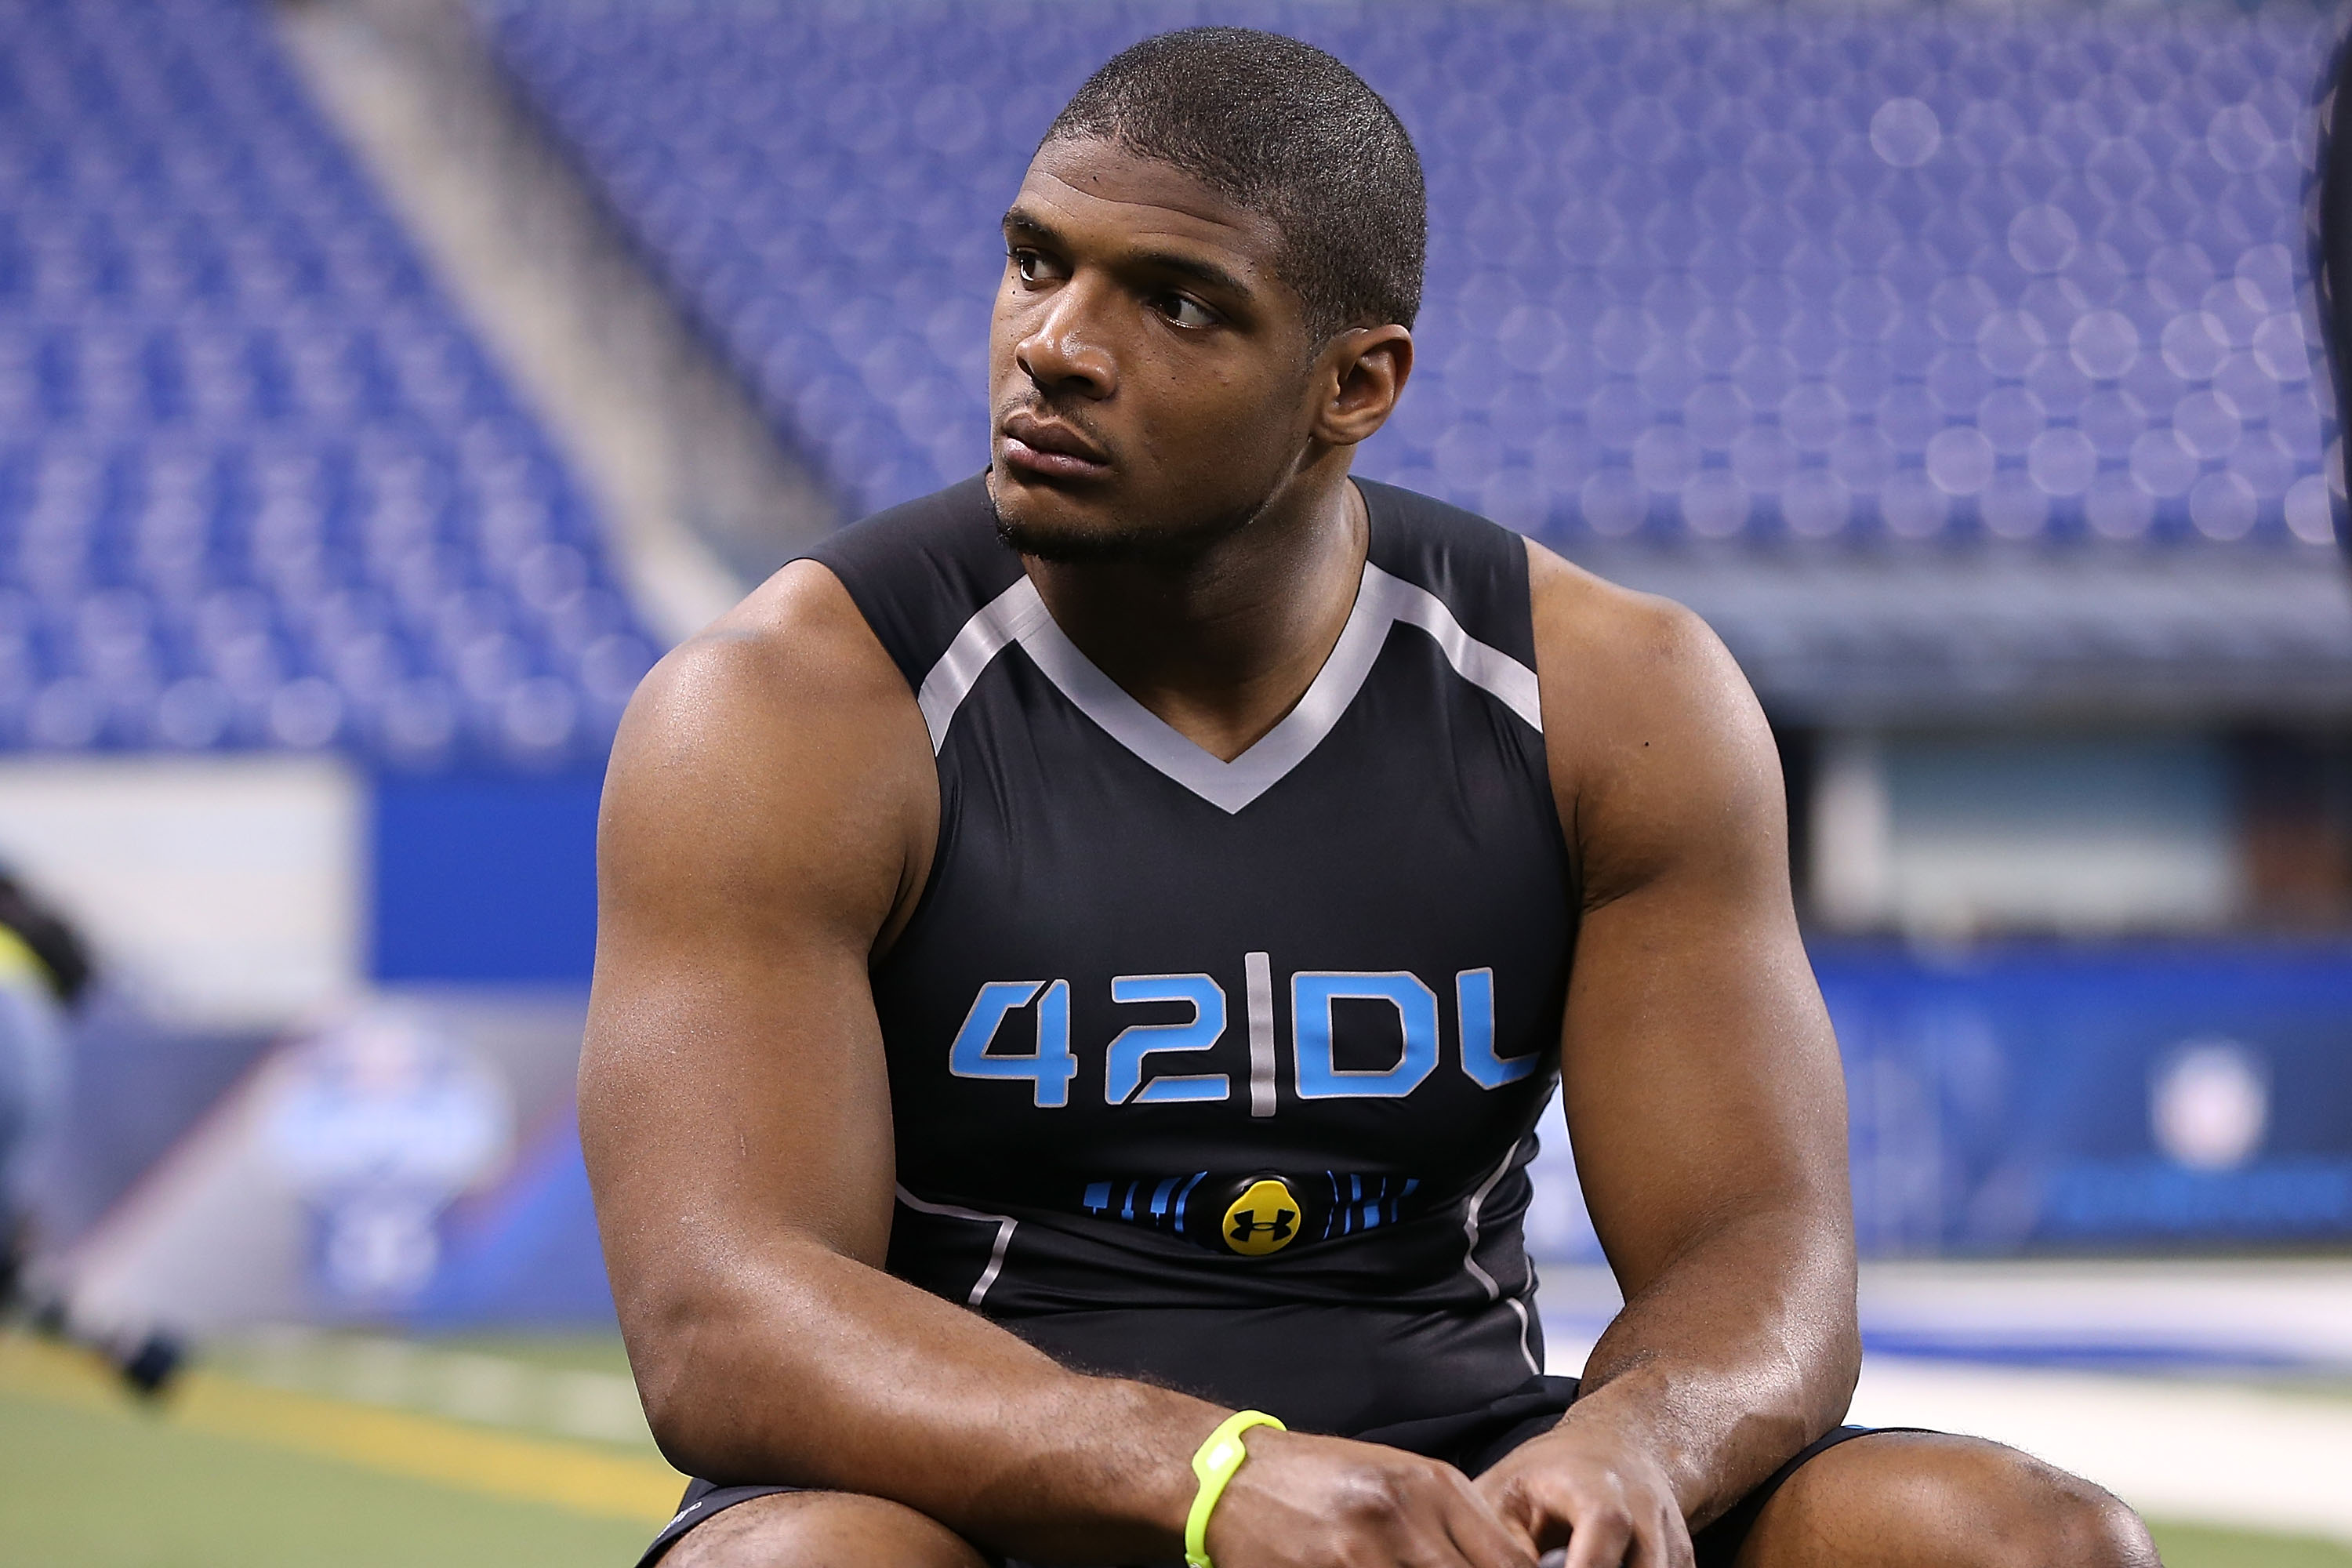 University of Missouri defensive end Michael Sam warms up at the 2014 NFL Scouting Combine at Lucas Oil Stadium in Indianapolis, on Feb. 24, 2014. (Ben Liebenberg—AP)